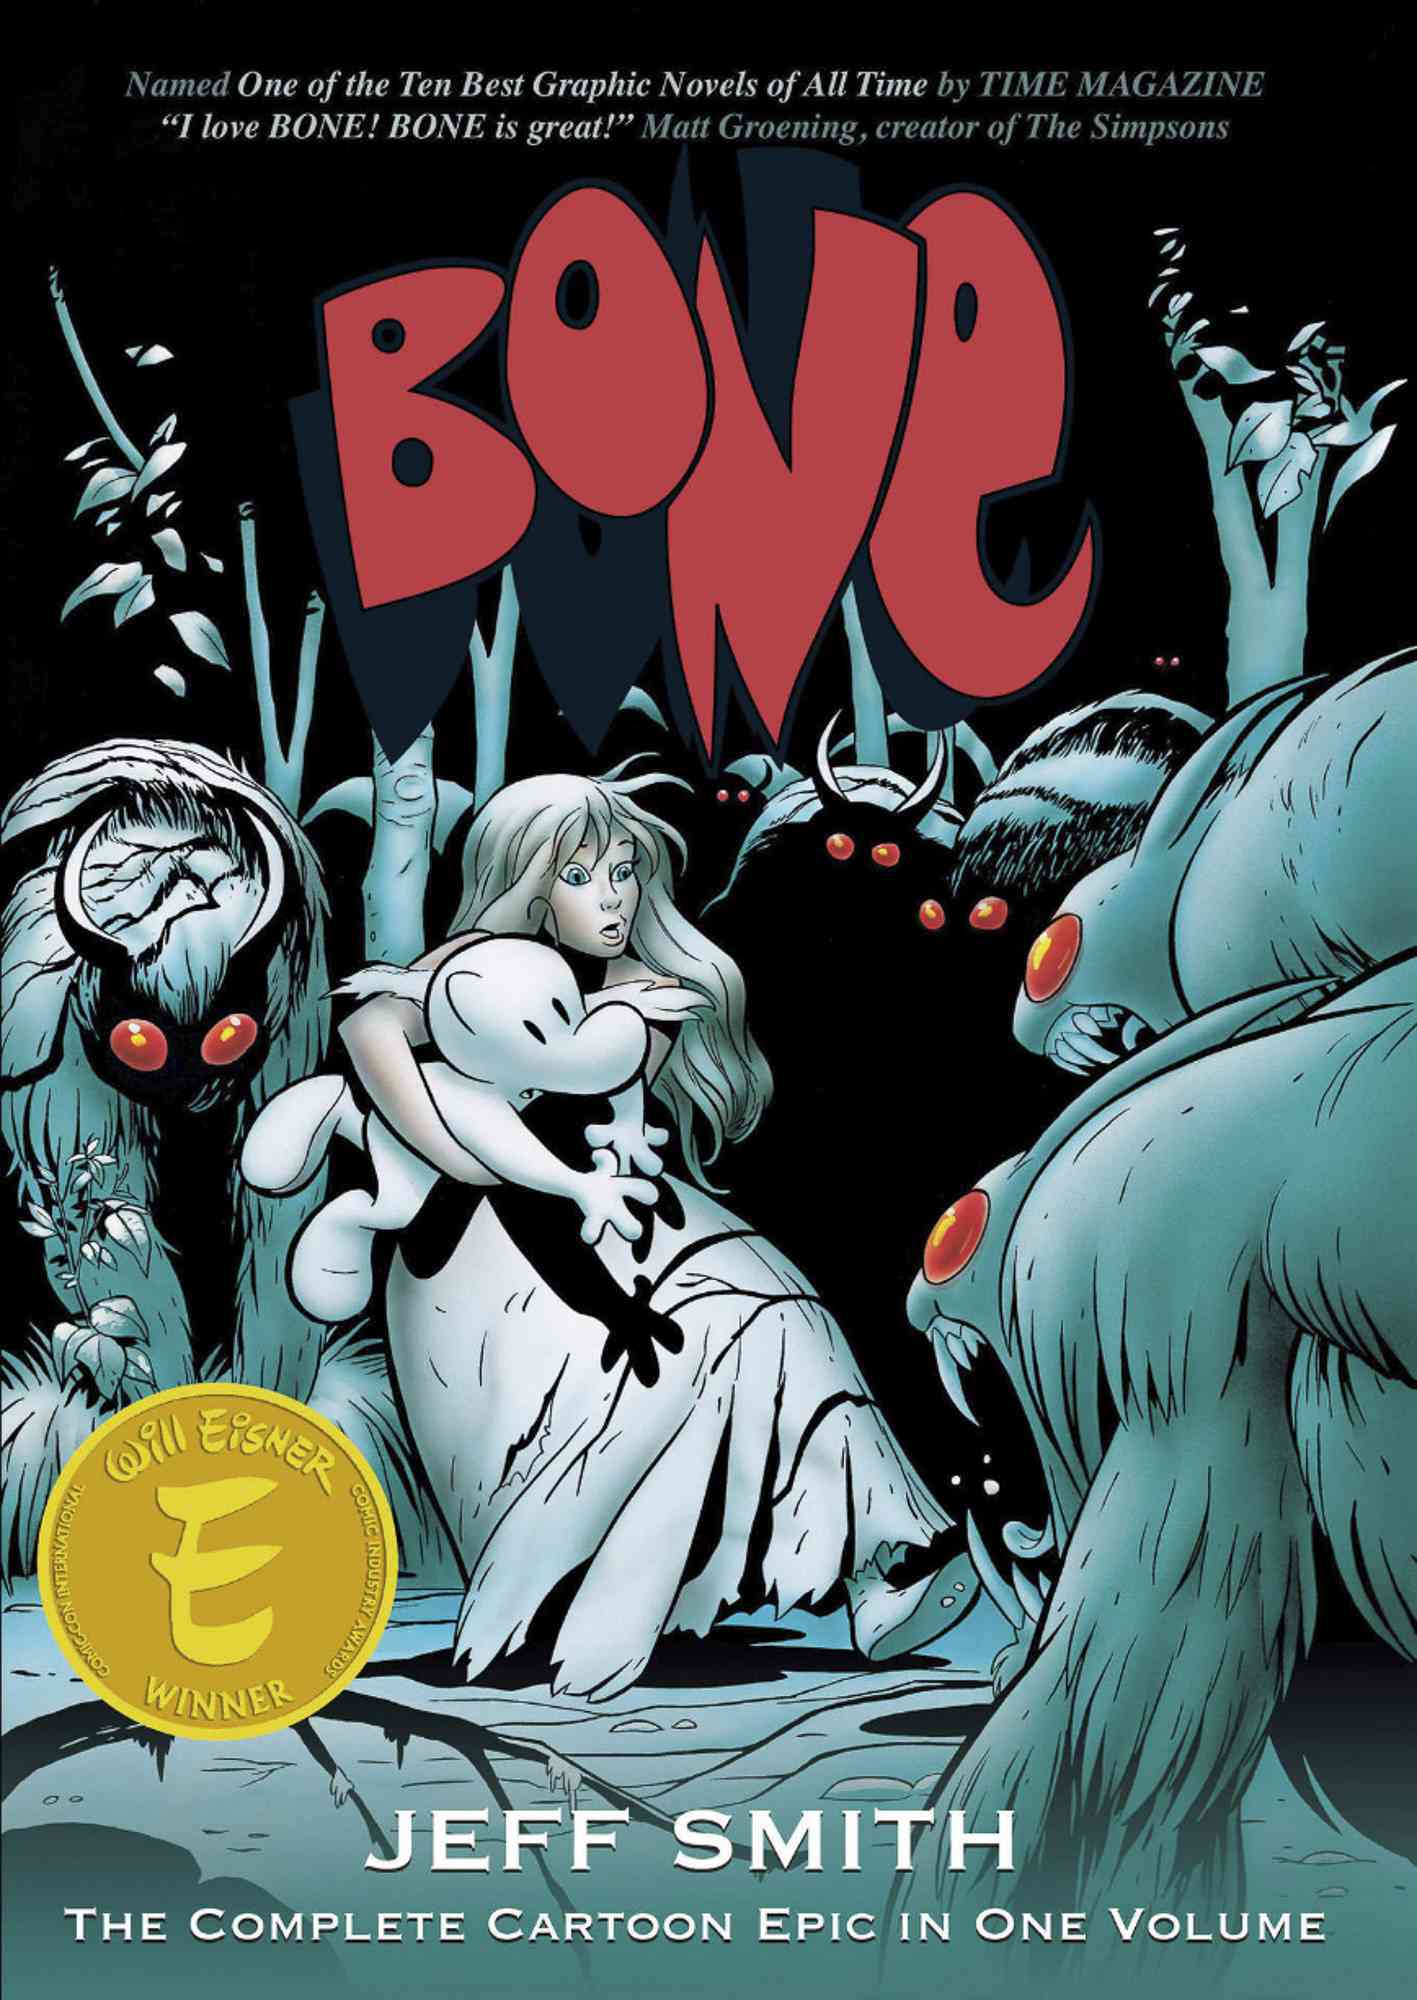 The cover of the complete collection of 'Bone'